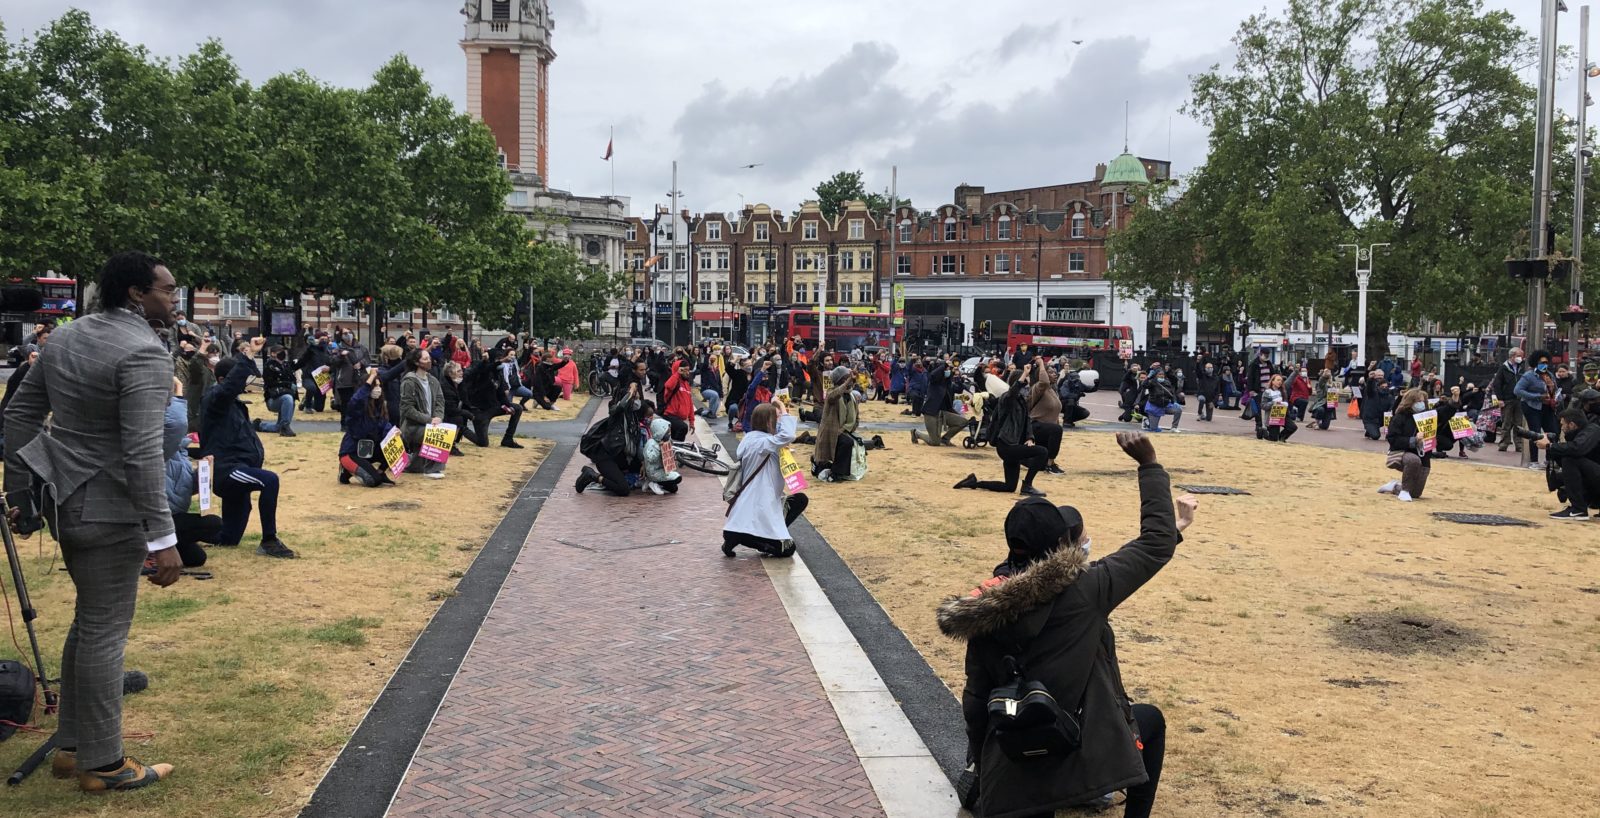 People take the knee at a Black lives matter protest in Windrush Square